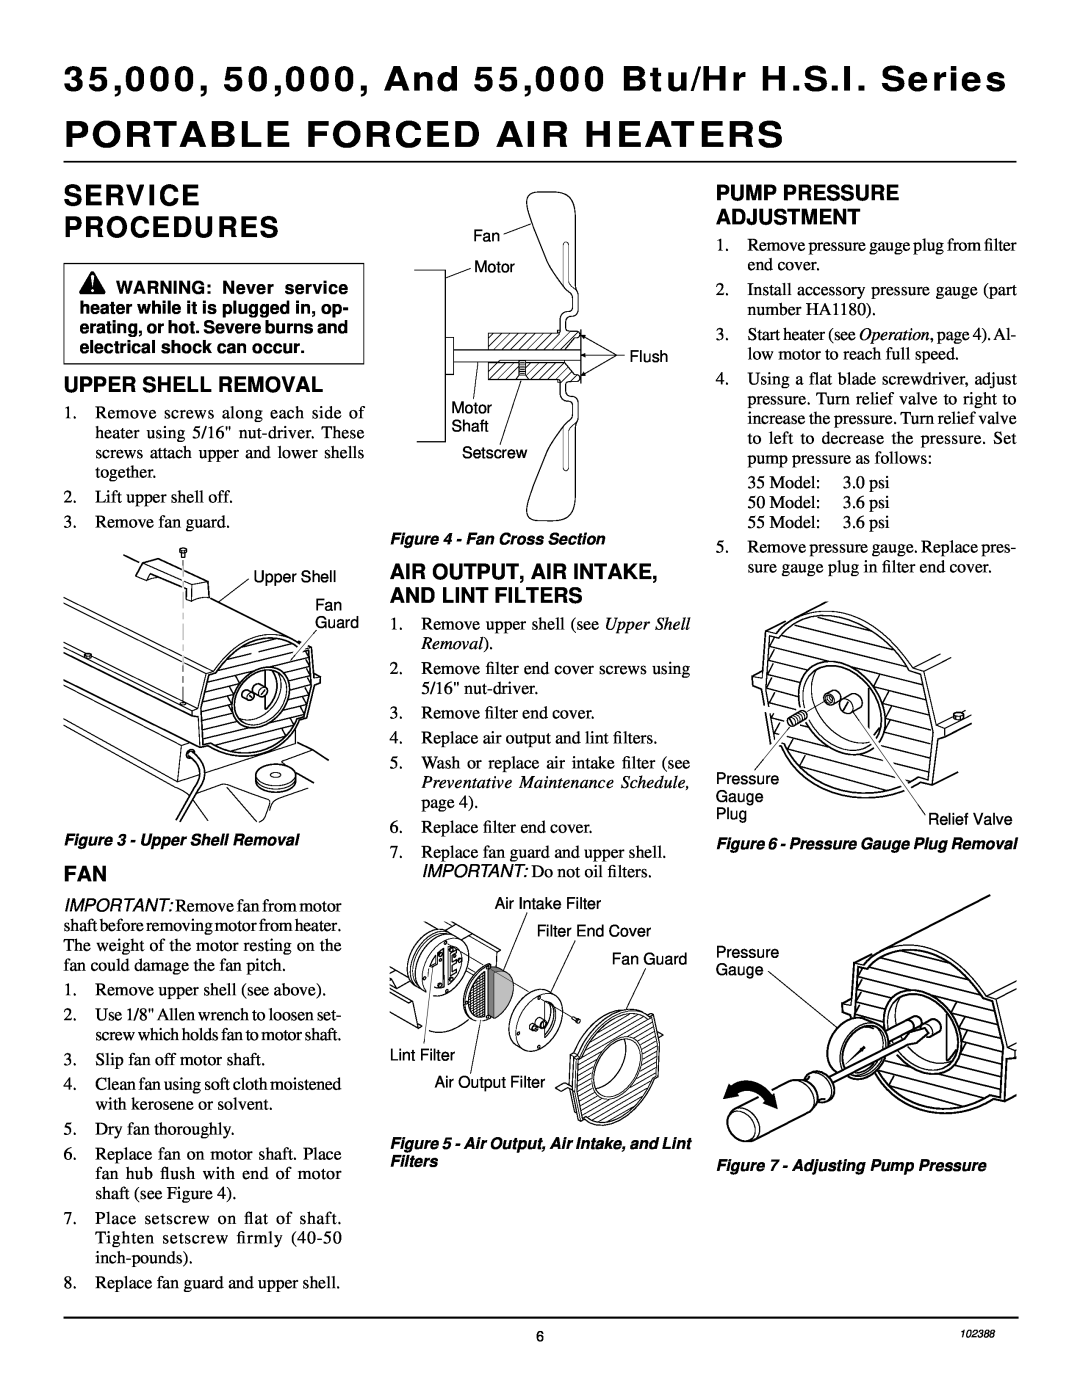 Desa and 55 Service Procedures, Upper Shell Removal, Air Output, Air Intake, And Lint Filters, Pump Pressure Adjustment 